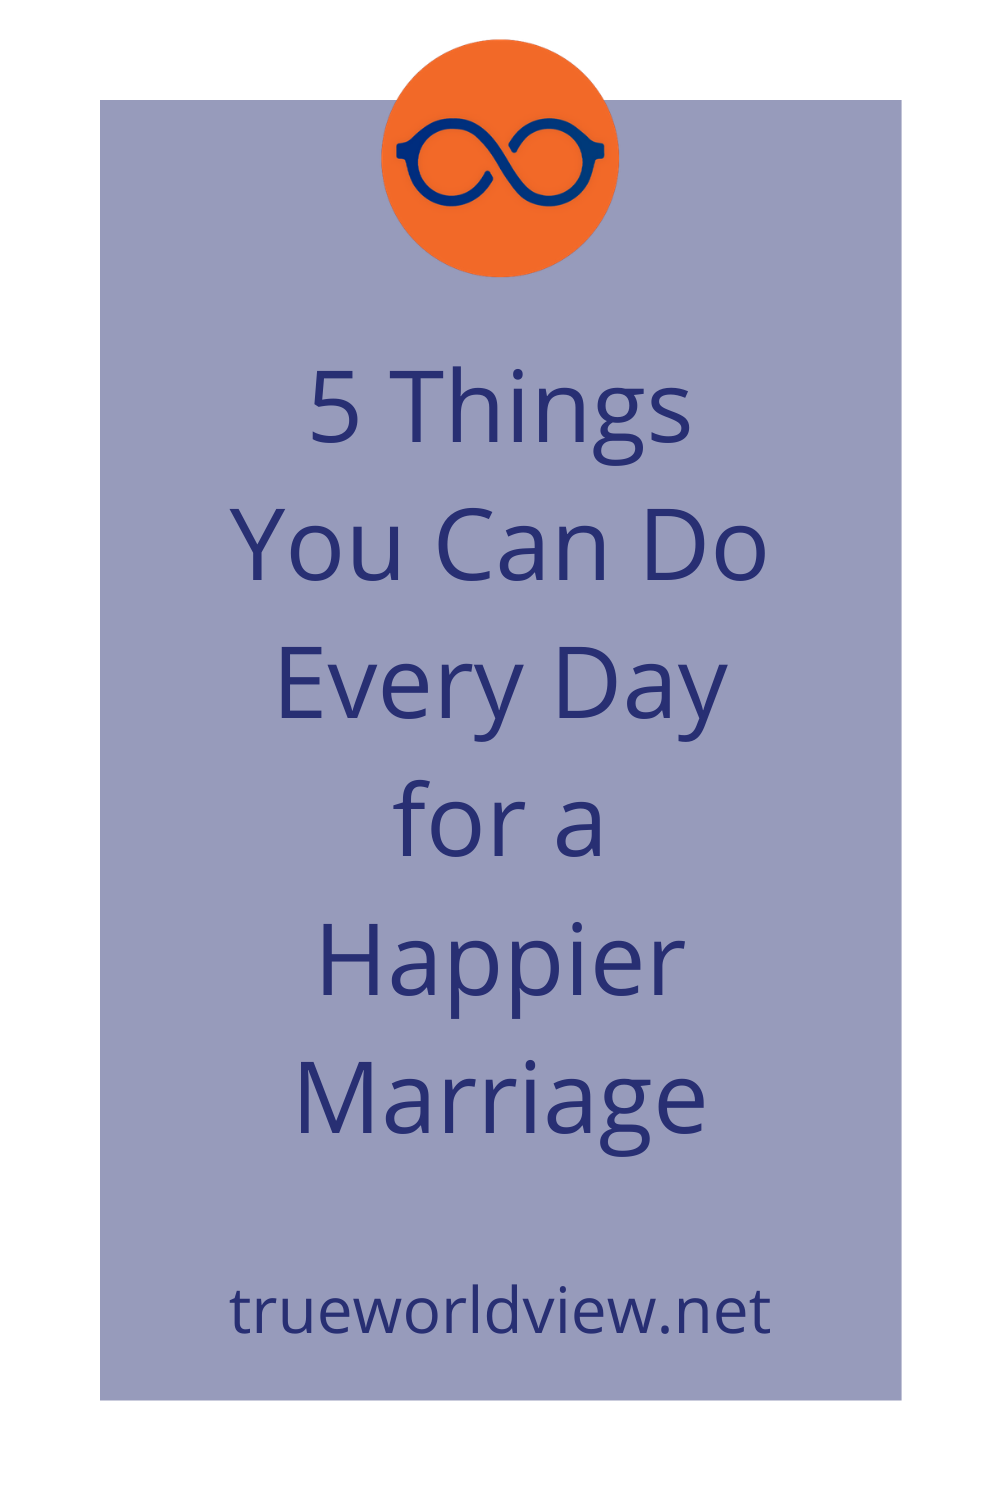 Have a Happier Marriage Every Day with These 5 Tips